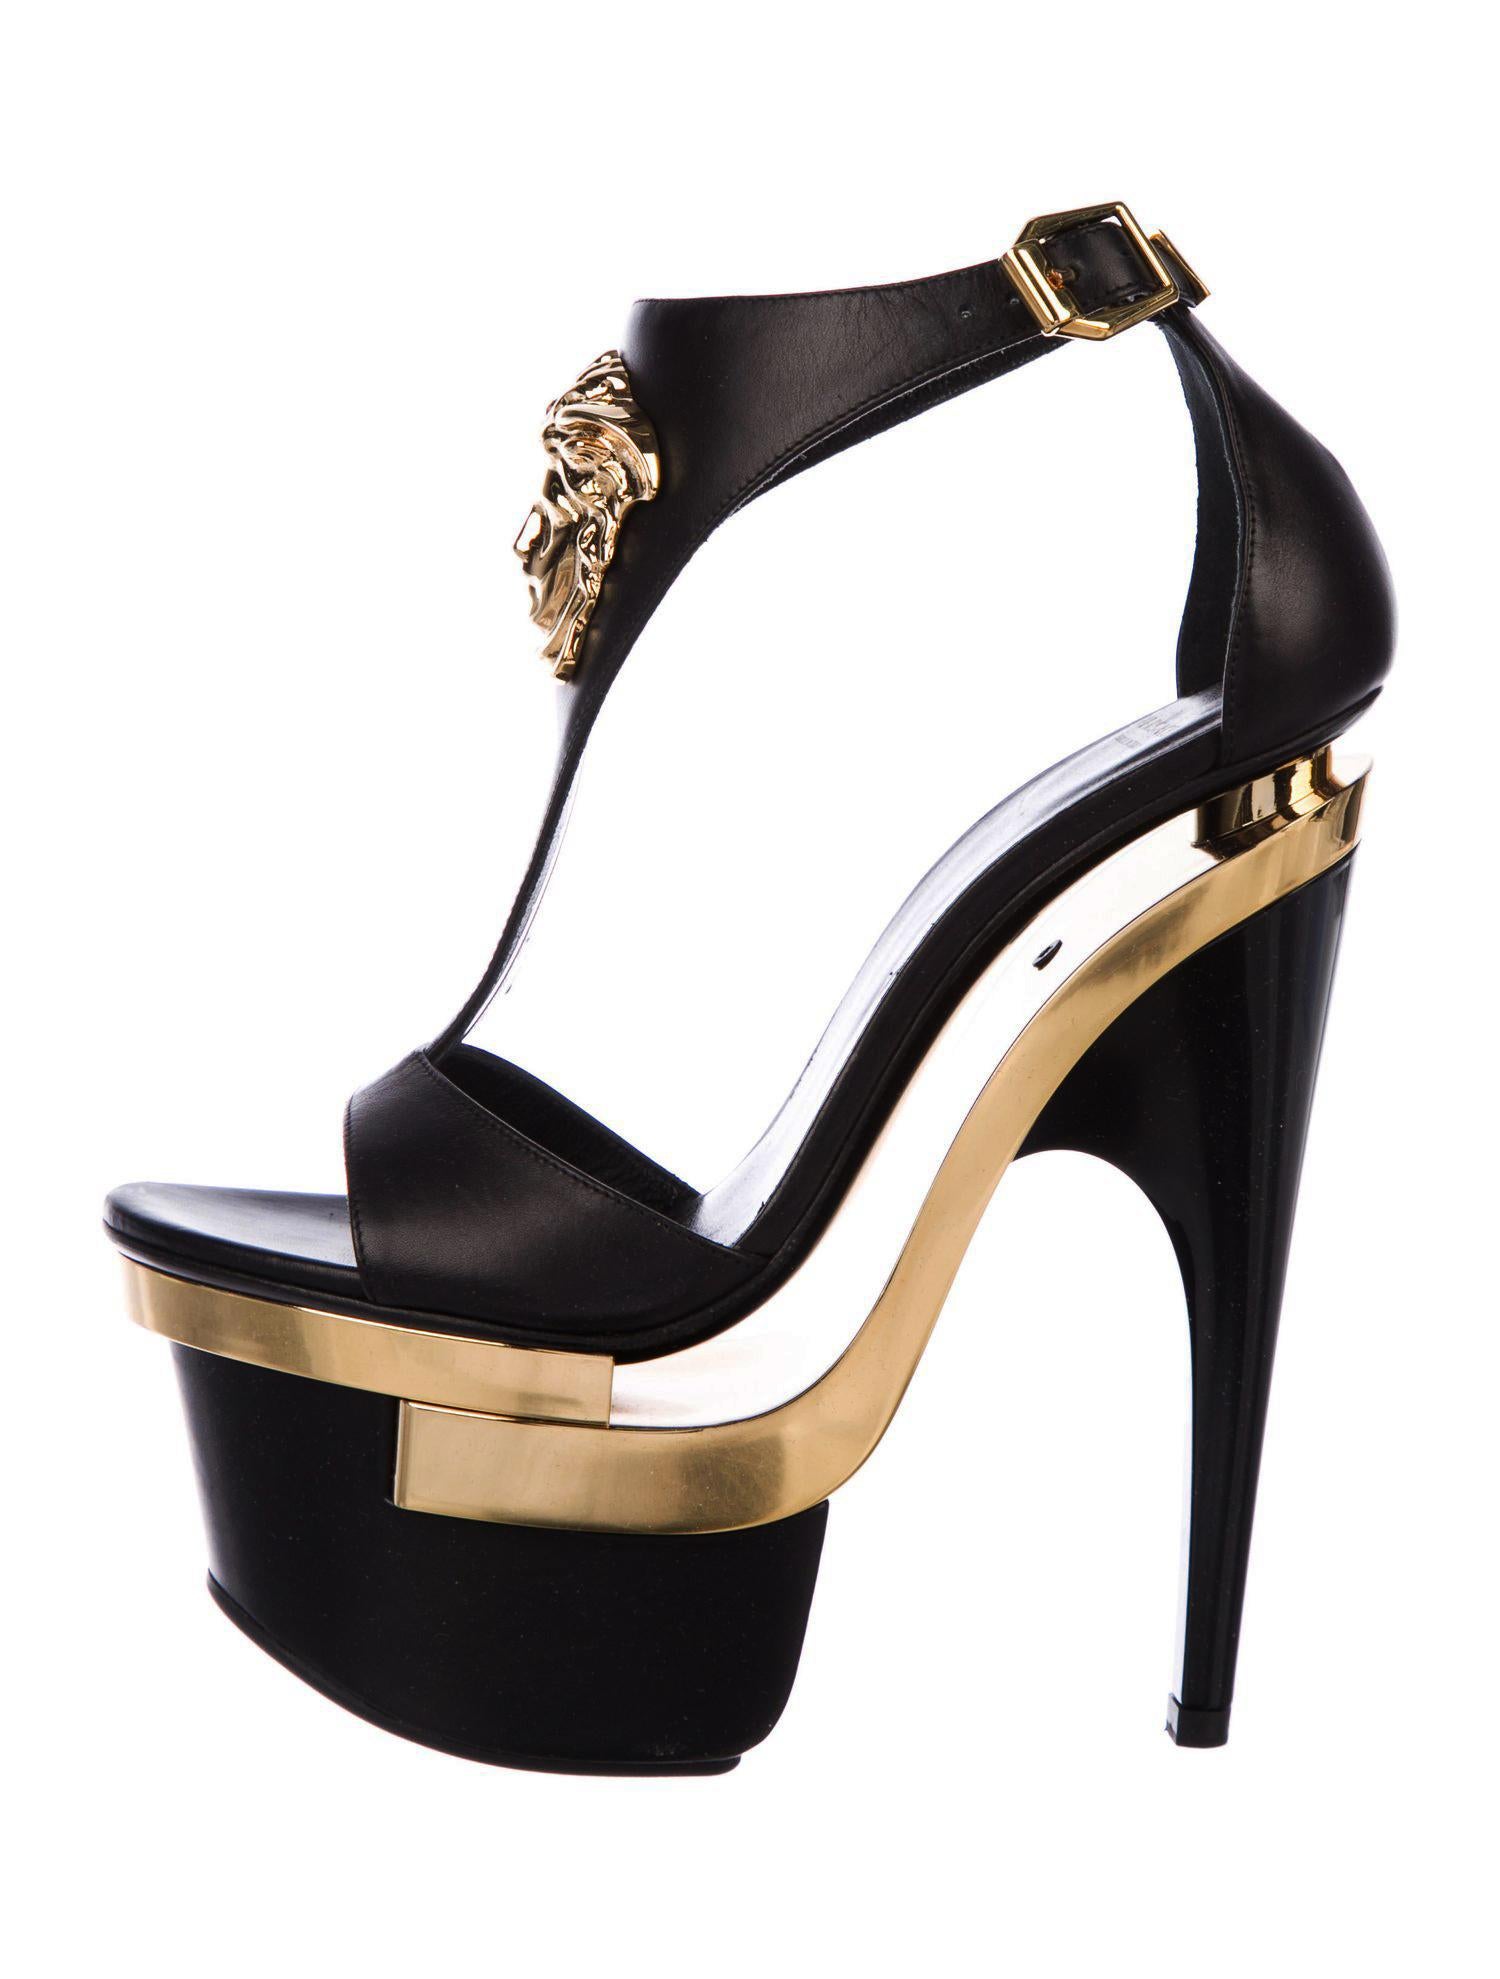 New Versace Black and Gold Leather Triple Platform Sandals
Designer size 35 - US 5
Sold out everywhere after they appeared in Nicki's video!
100% Leather, Gold-tone Medusa at Vamps, Triple Platform, Gold-tone Buckle Closure.
Heel Height - 6.5